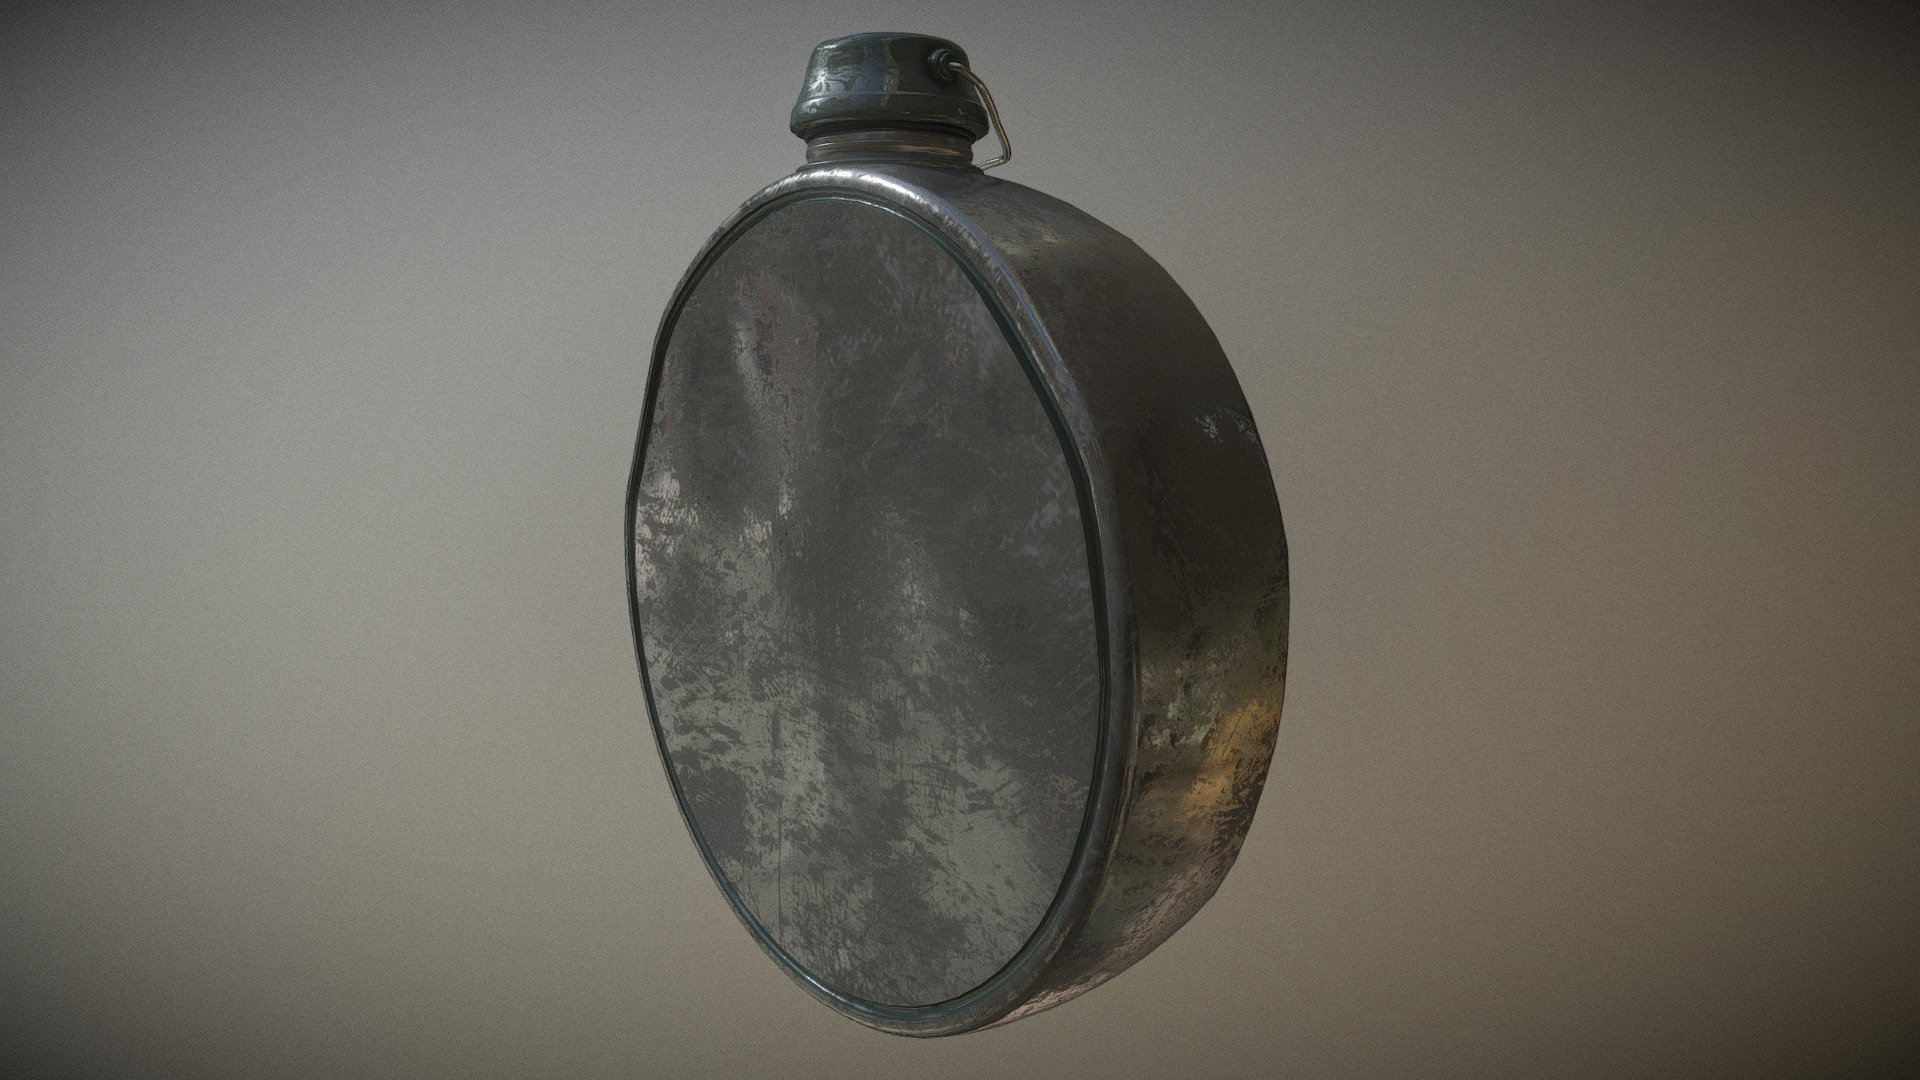 This Rounded Flask has been on the battlefield. It has dents and scratches but is still a reliable flask for you to drink out of.

Made in Blender - Rounded Flask (worn/damaged) - Download Free 3D model by DFS studio (@DFS_studio) 3d model